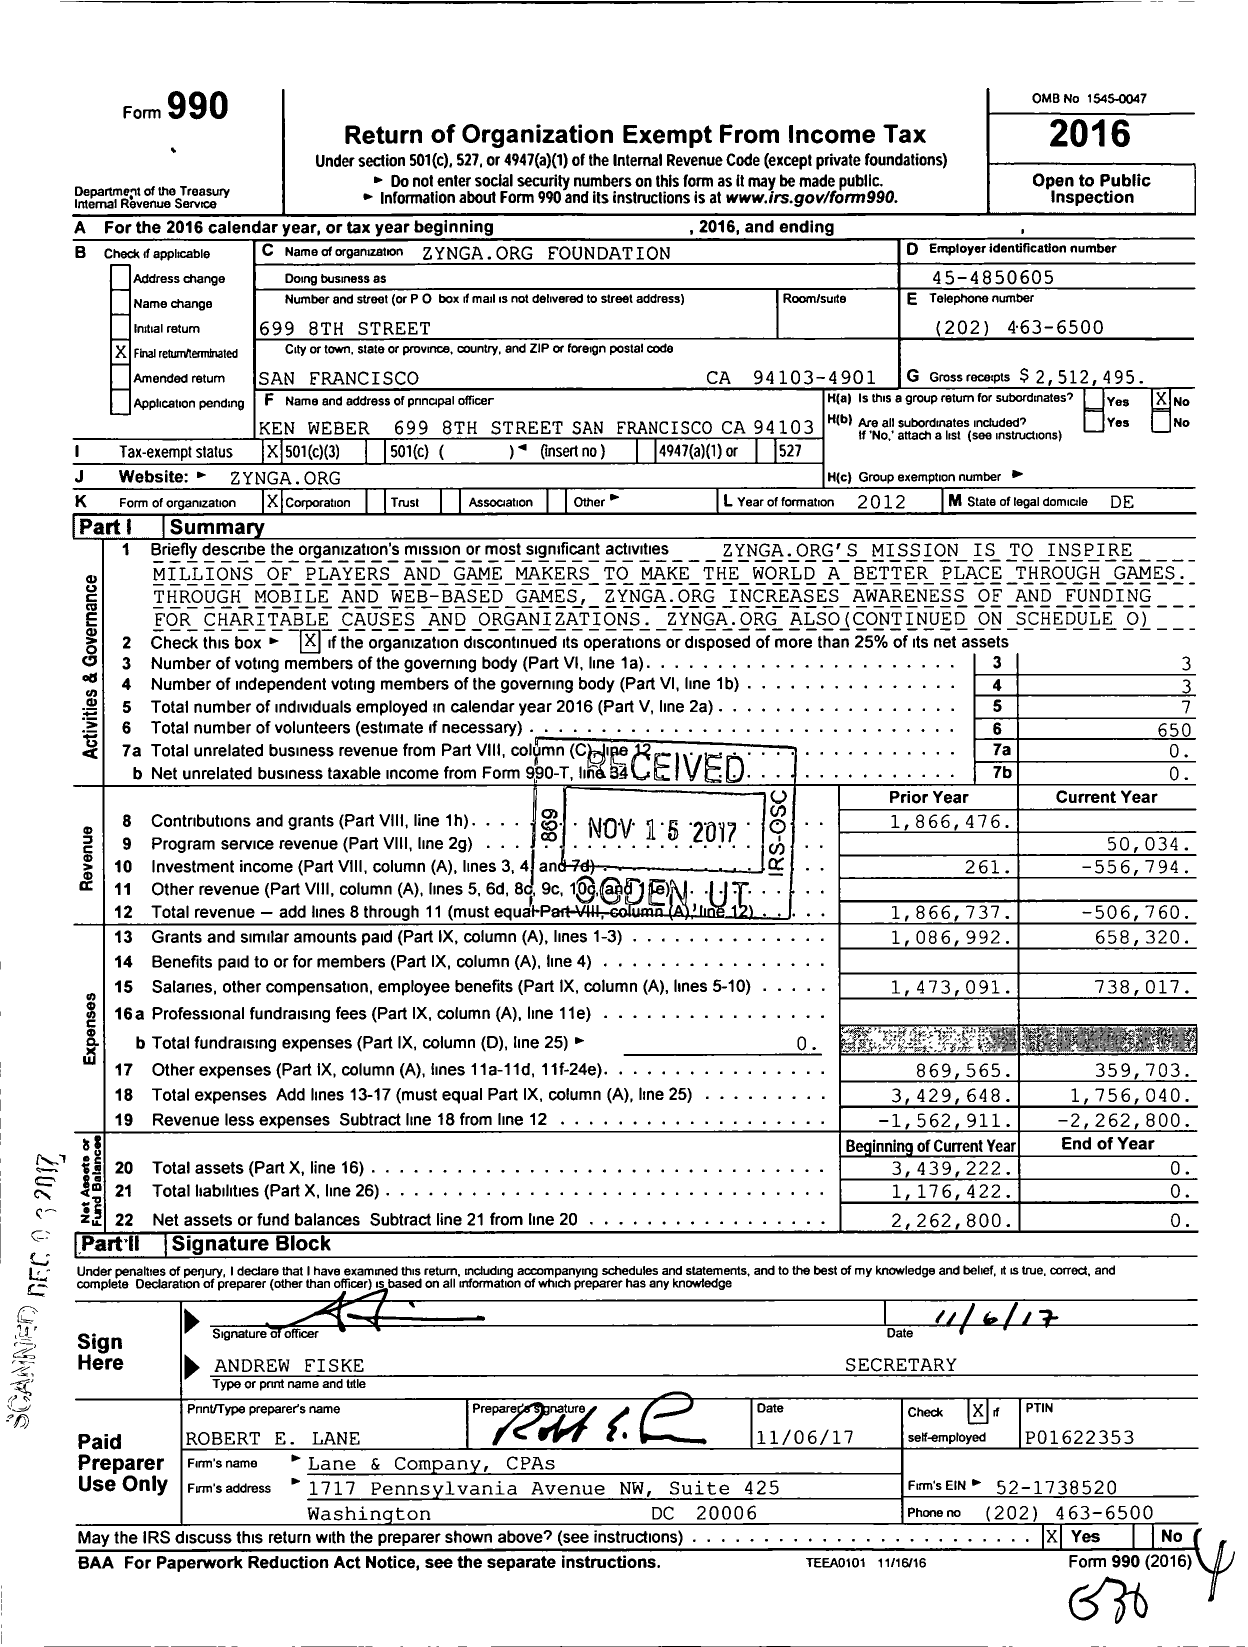 Image of first page of 2016 Form 990 for Zynga Org Foundation